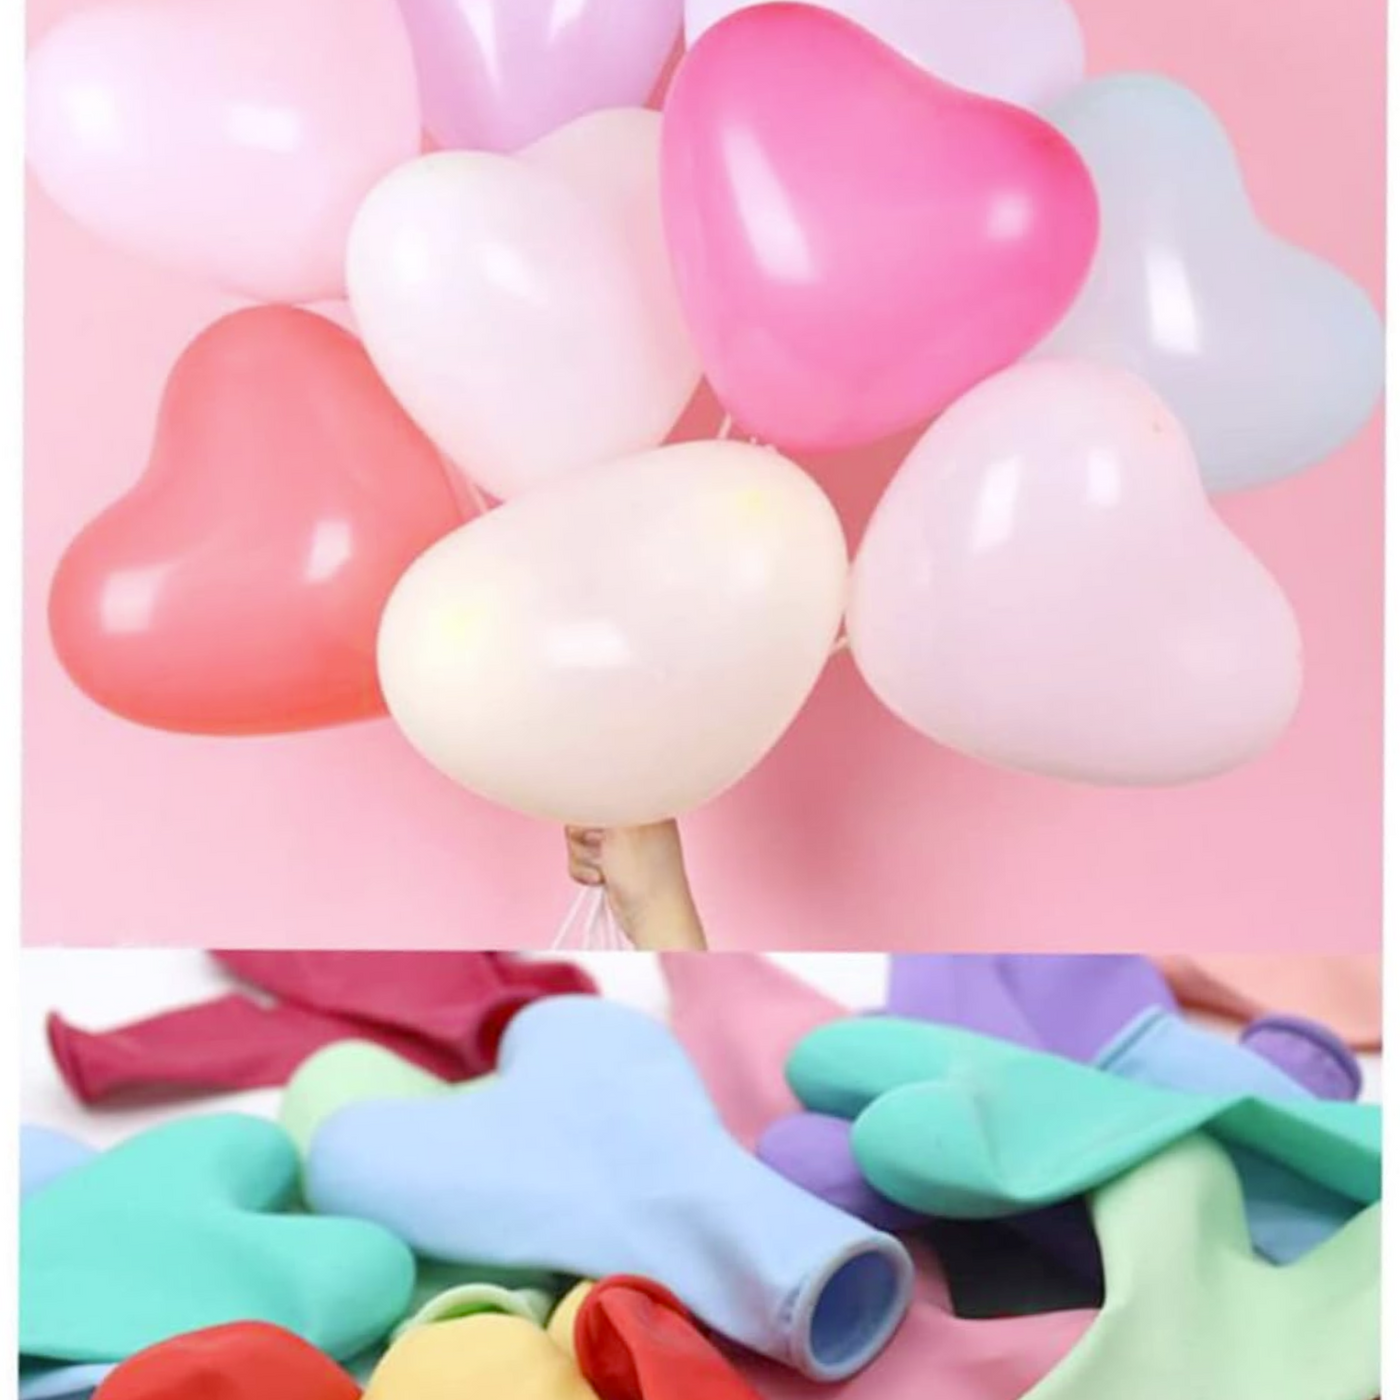 12-inch Candy Heart Shaped Pastel Balloons